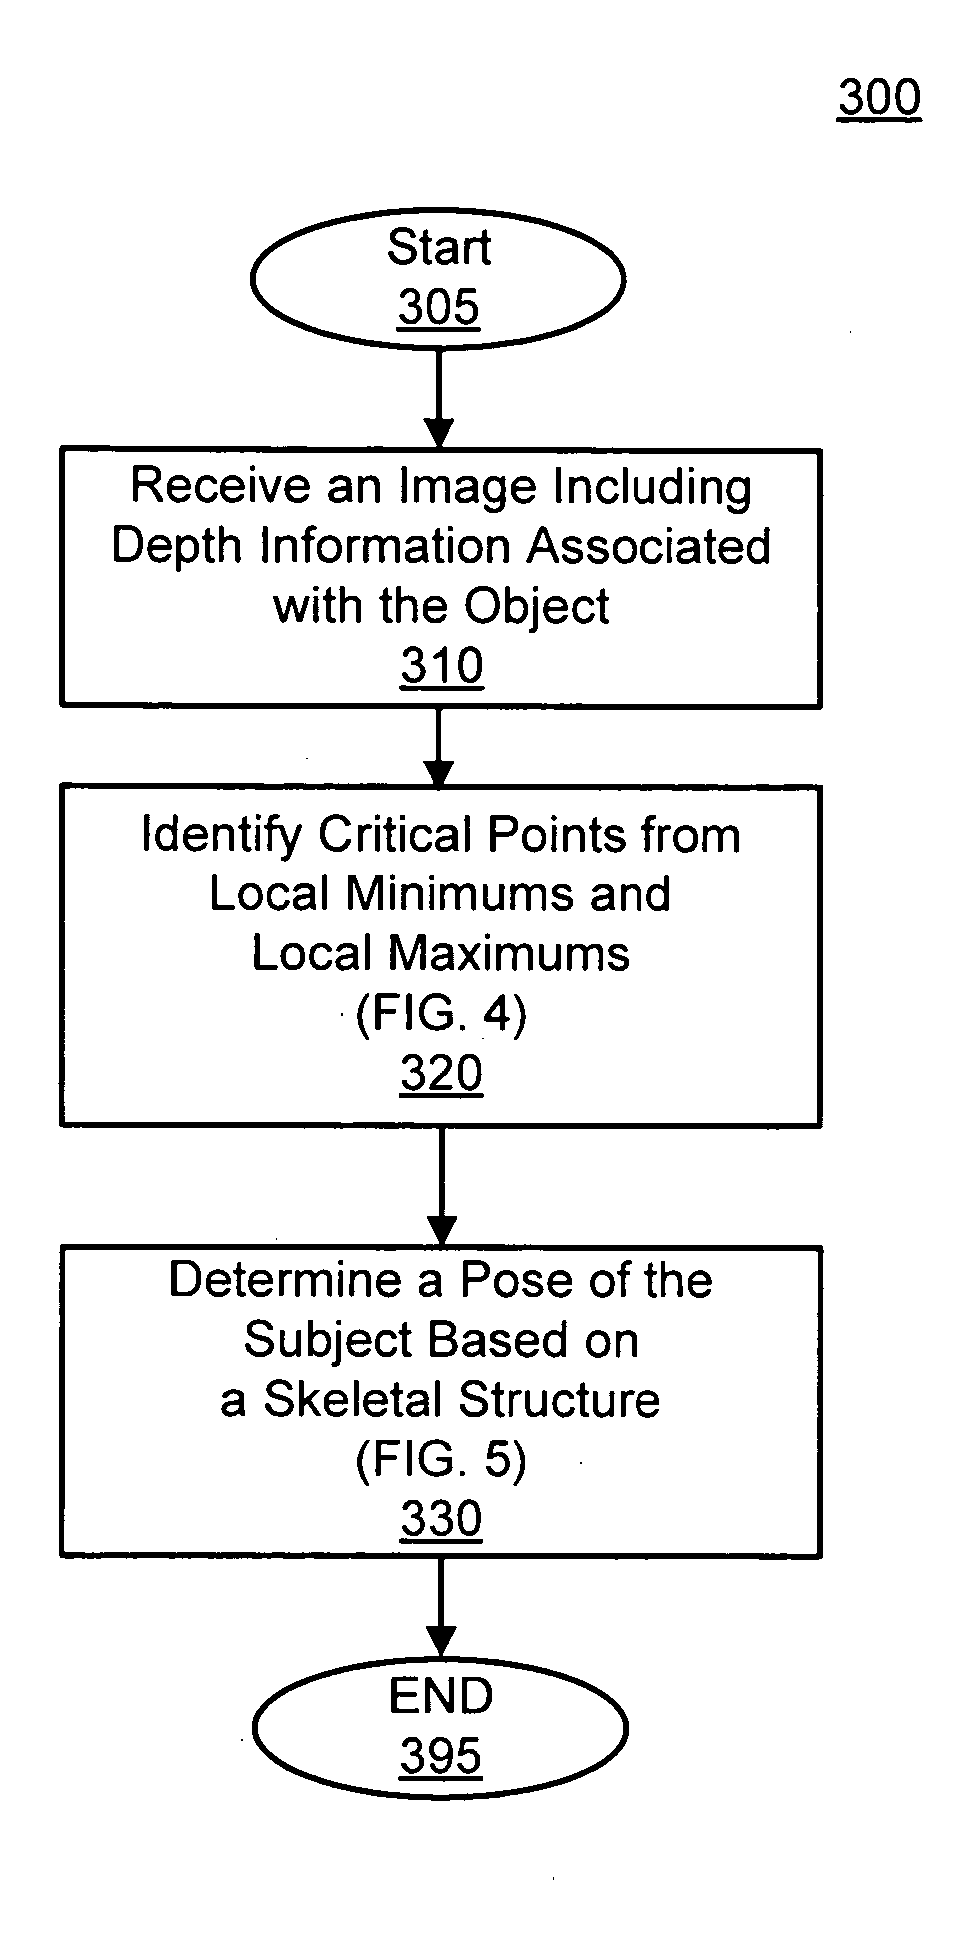 Pose estimation based on critical point analysis